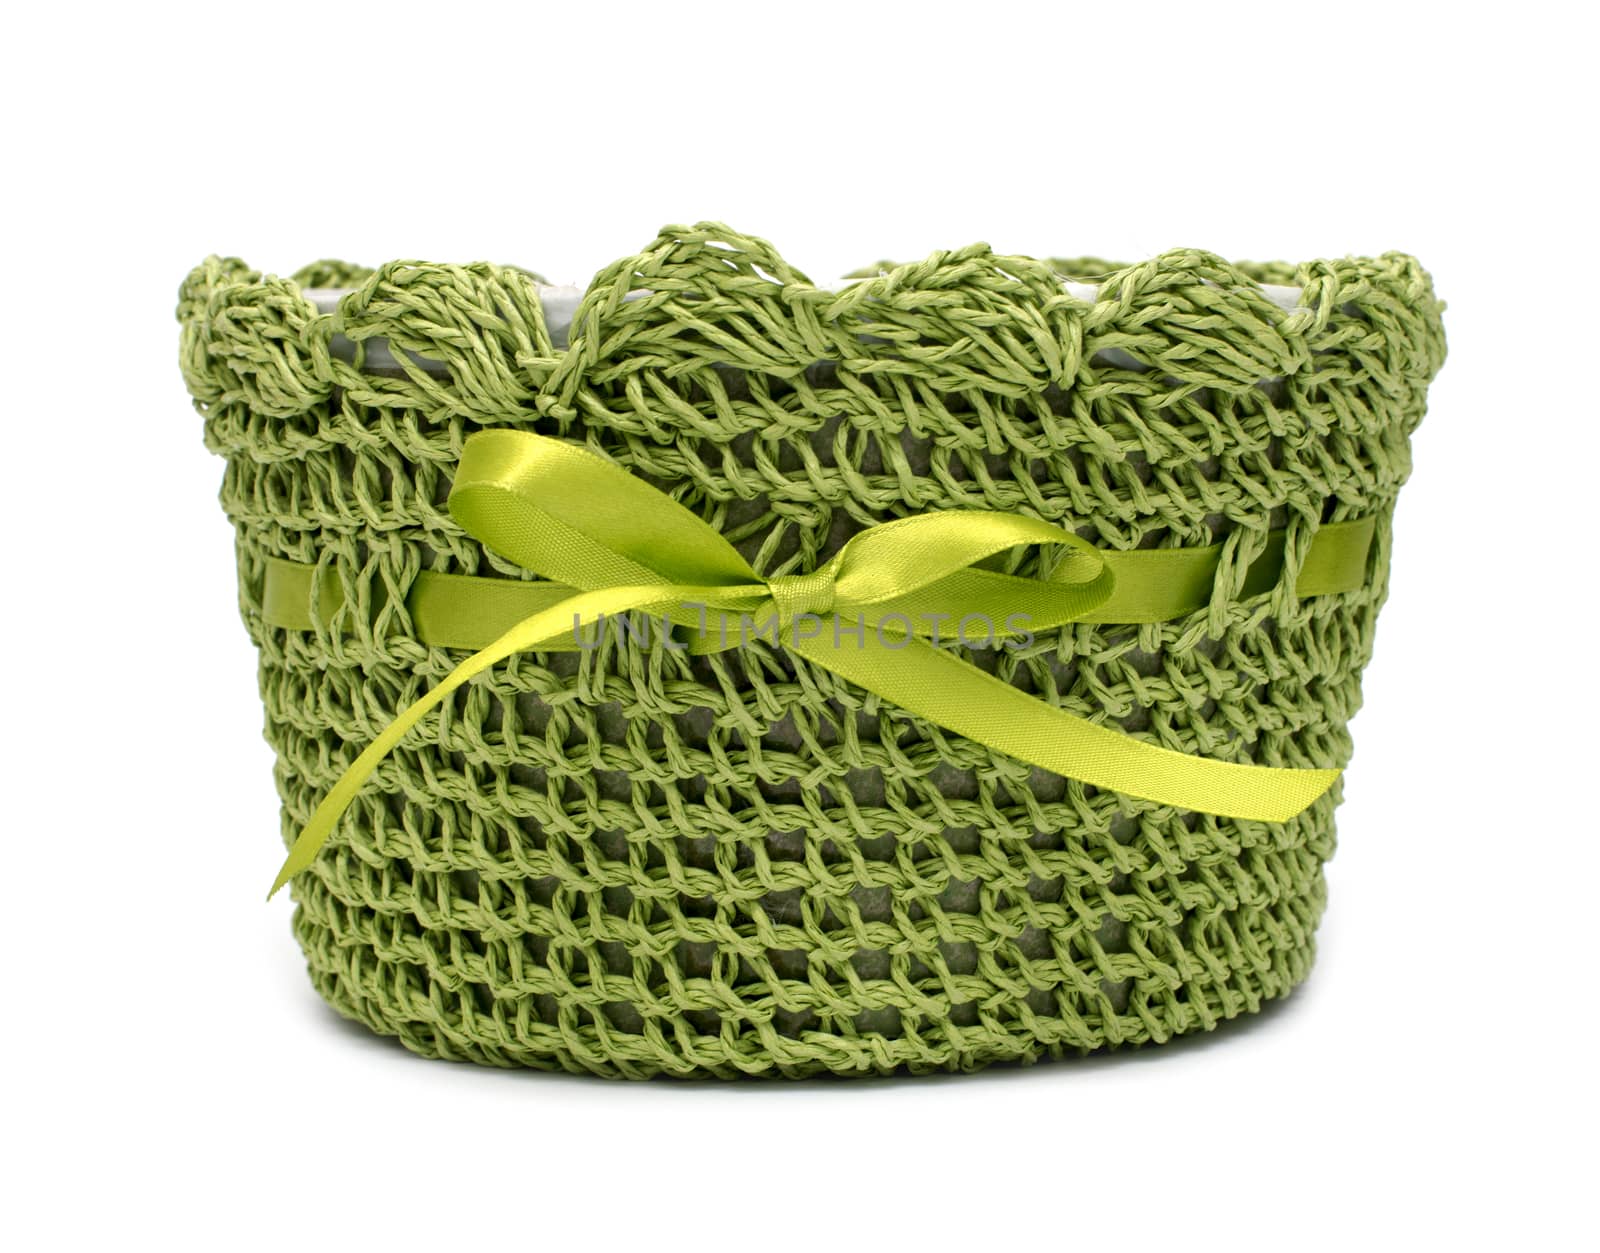 Green empty basket on a white background